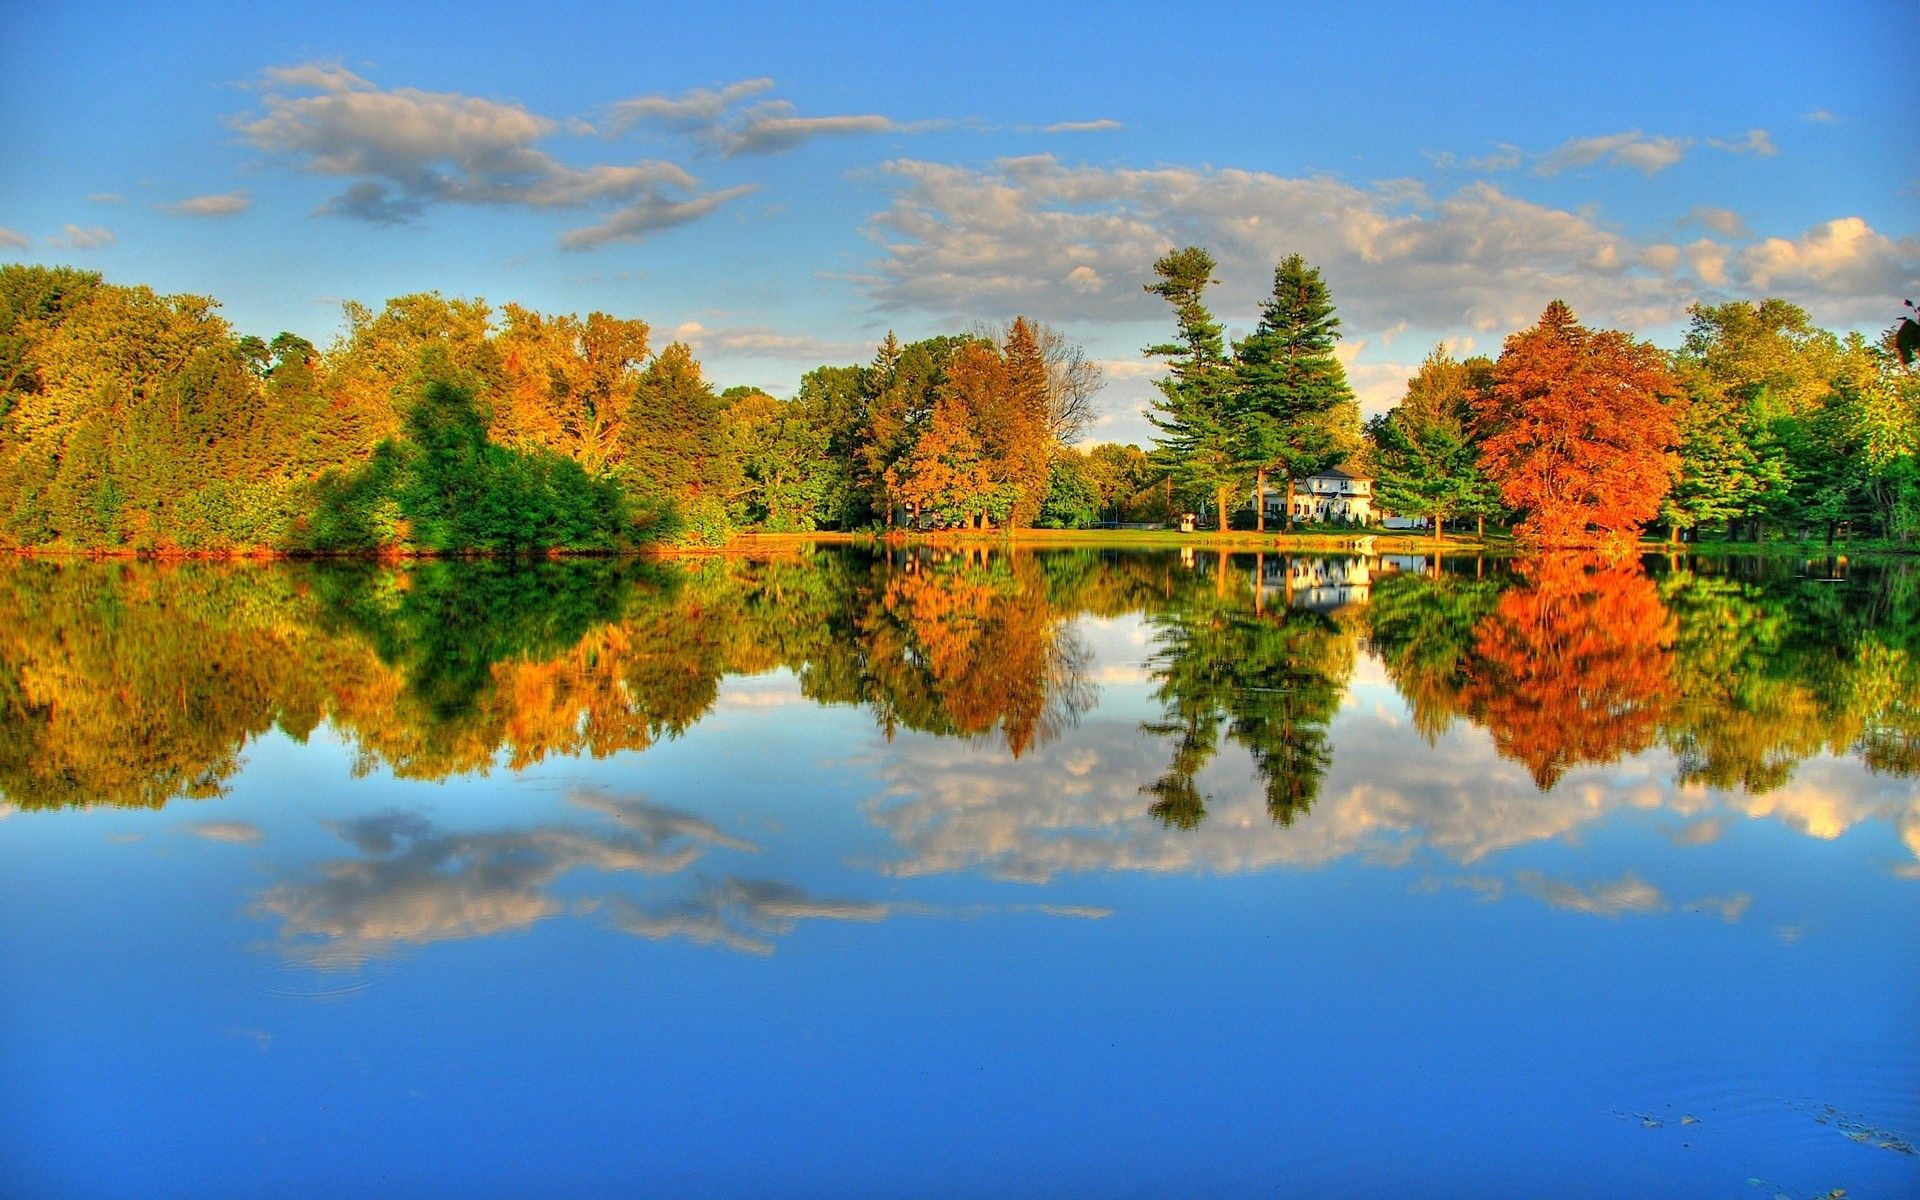 lake, autumn, nature, trees, reflection, shore, bank, house, colors, color phone background